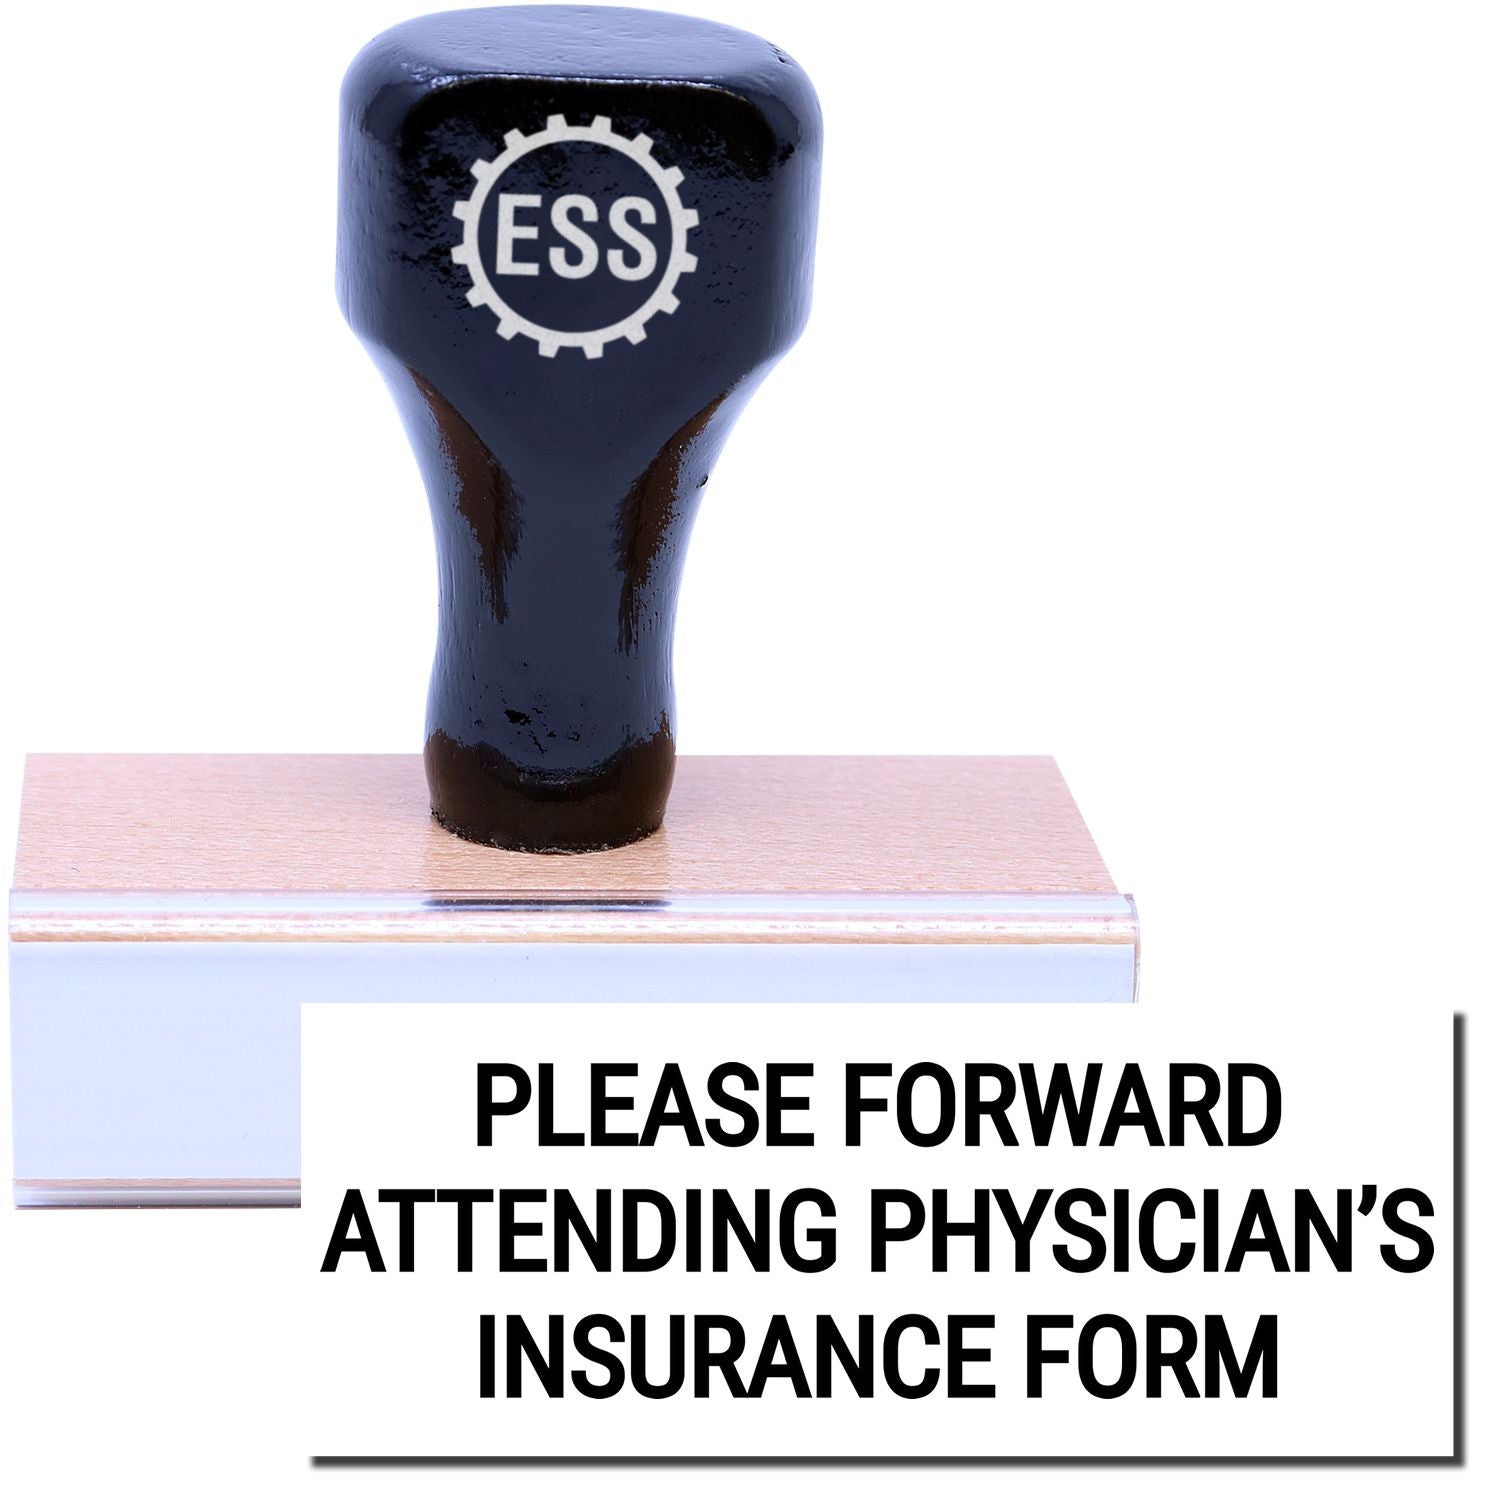 A stock office rubber stamp with a stamped image showing how the text "PLEASE FORWARD ATTENDING PHYSICIAN'S INSURANCE FORM" in a large font is displayed after stamping.